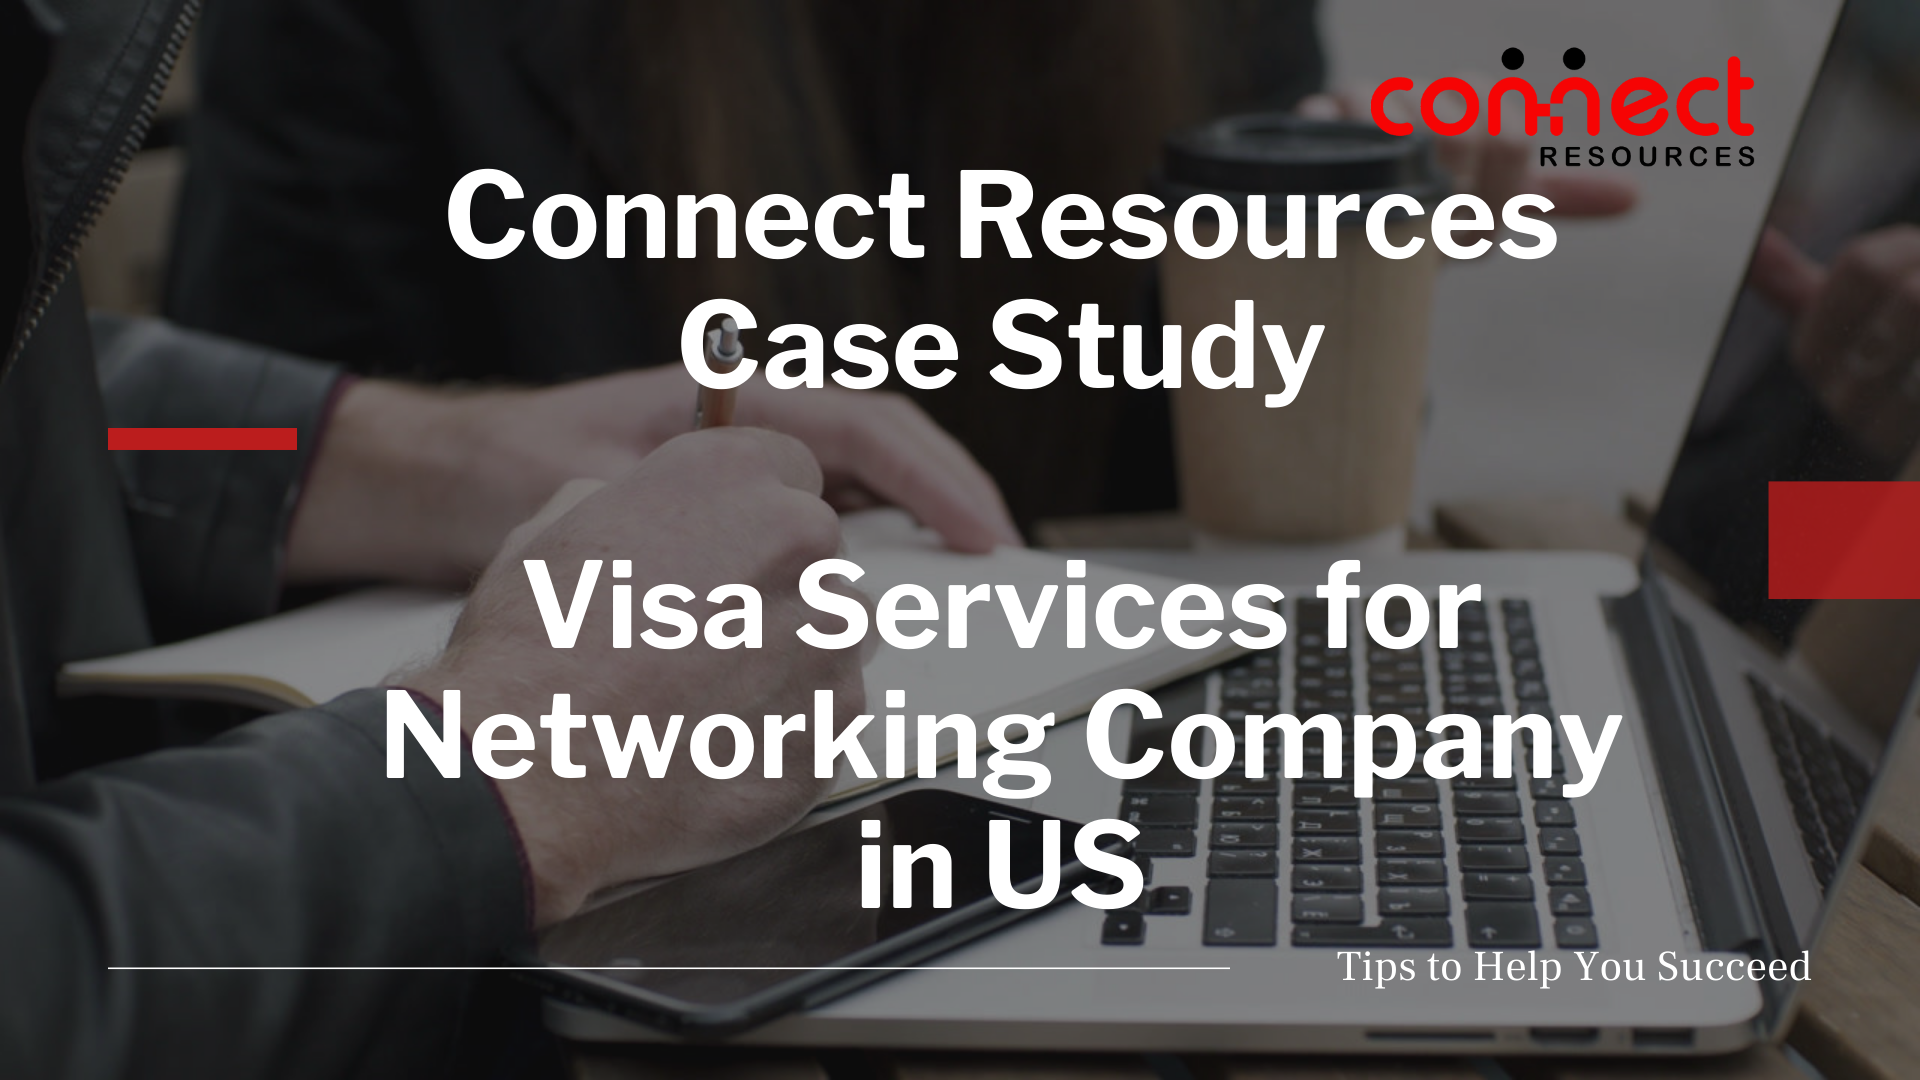 Visa Services for Networking Company in US- Connect Resources Case Study